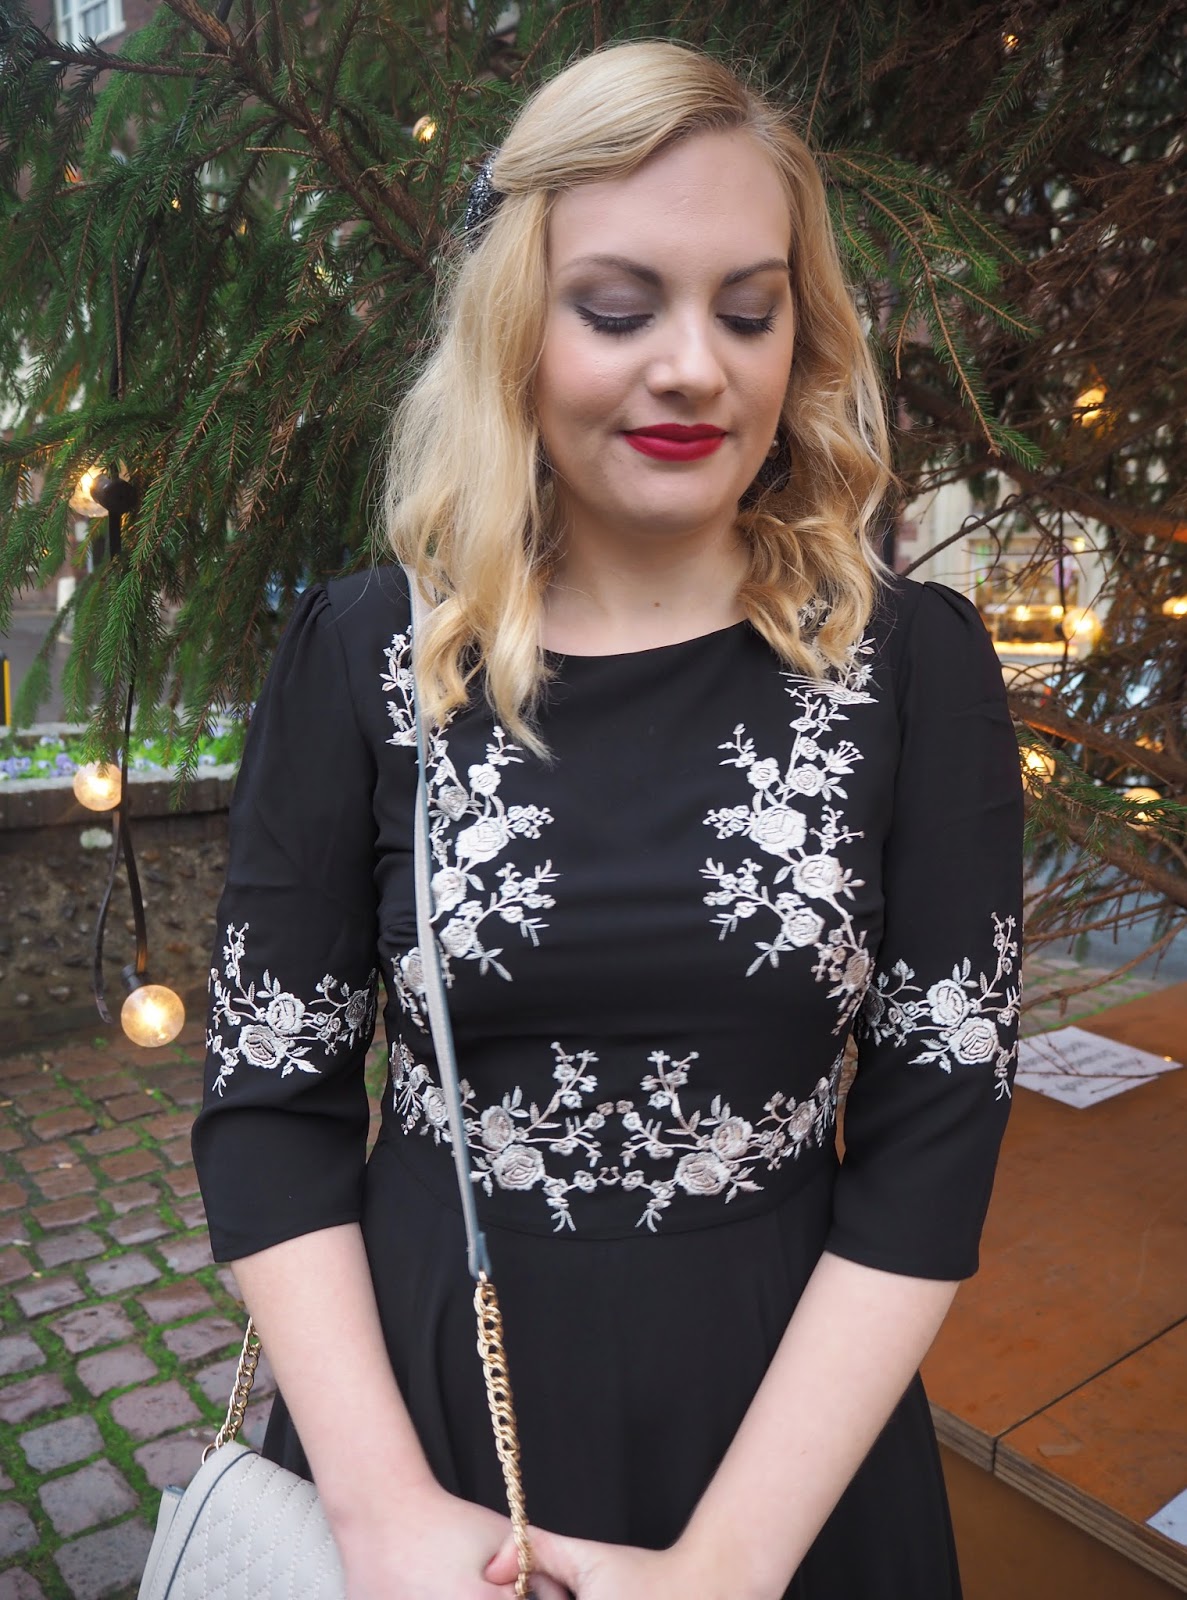 New Years Eve Outfit Ideas, Party Season, Outfit Ideas, Katie Kirk Loves, New Years Eve, Oasis Fashion, Fashion Blogger, UK Fashion Blogger, Outfit Of The Day, Style Blogger, Outfit Photoshoot, UK Blogger, Party Dresses, Party Outfit Inspiration 